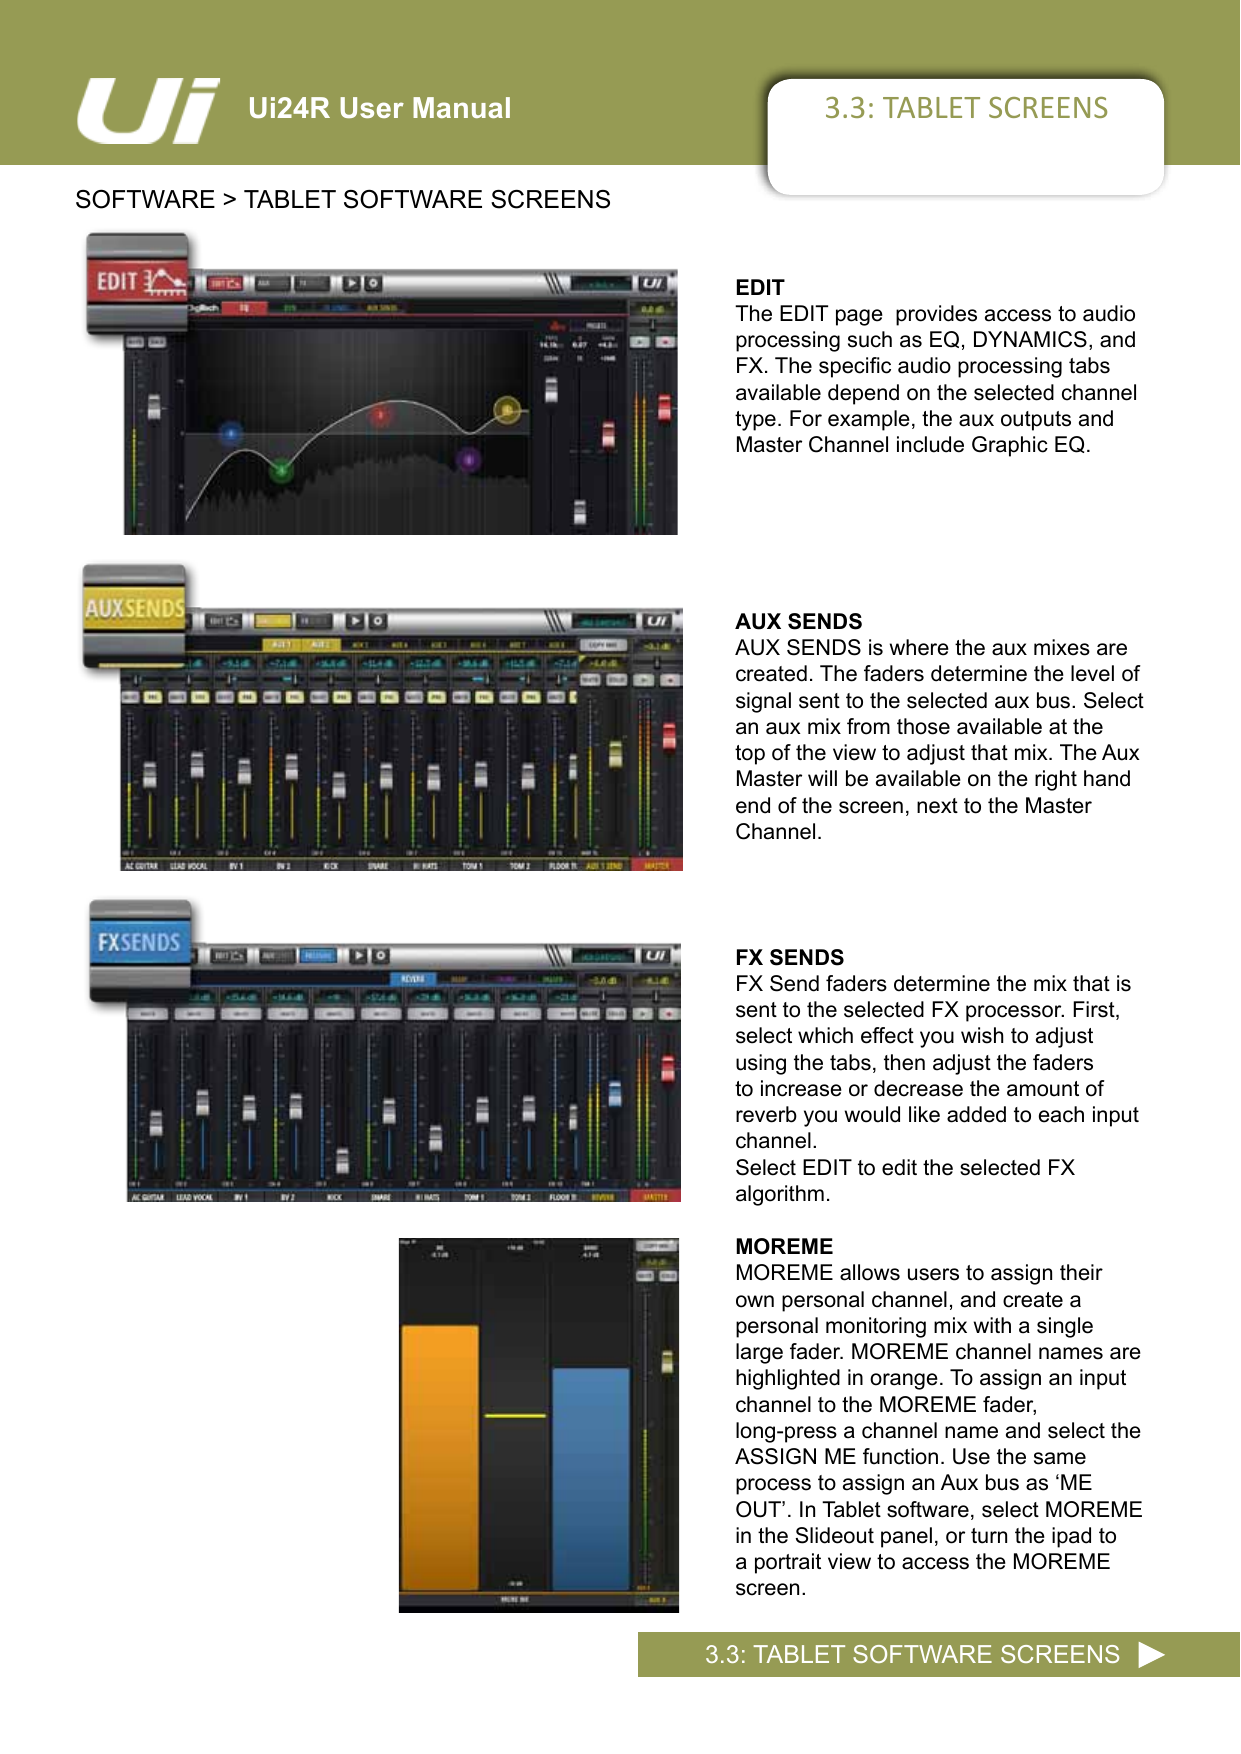 3.3: TABLET SCREENSSOFTWARE &gt; TABLET SOFTWARE SCREENS3.3: TABLET SOFTWARE SCREENSUi24R User ManualAUX SENDSAUX SENDS is where the aux mixes are  created. The faders determine the level of signal sent to the selected aux bus. Select an aux mix from those available at the top of the view to adjust that mix. The Aux Master will be available on the right hand end of the screen, next to the Master Channel.EDITThe EDIT page  provides access to audio processing such as EQ, DYNAMICS, and FX.Thespecicaudioprocessingtabsavailable depend on the selected channel type. For example, the aux outputs and  Master Channel include Graphic EQ.FX SENDSFX Send faders determine the mix that is sent to the selected FX processor. First, select which effect you wish to adjust using the tabs, then adjust the faders to increase or decrease the amount of reverb you would like added to each input channel.Select EDIT to edit the selected FX  algorithm.MOREMEMOREME allows users to assign their own personal channel, and create a  personal monitoring mix with a single large fader. MOREME channel names are highlighted in orange. To assign an input channel to the MOREME fader,  long-press a channel name and select the ASSIGN ME function. Use the same  process to assign an Aux bus as ‘ME OUT’.InTabletsoftware,selectMOREMEin the Slideout panel, or turn the ipad to a portrait view to access the MOREME screen.